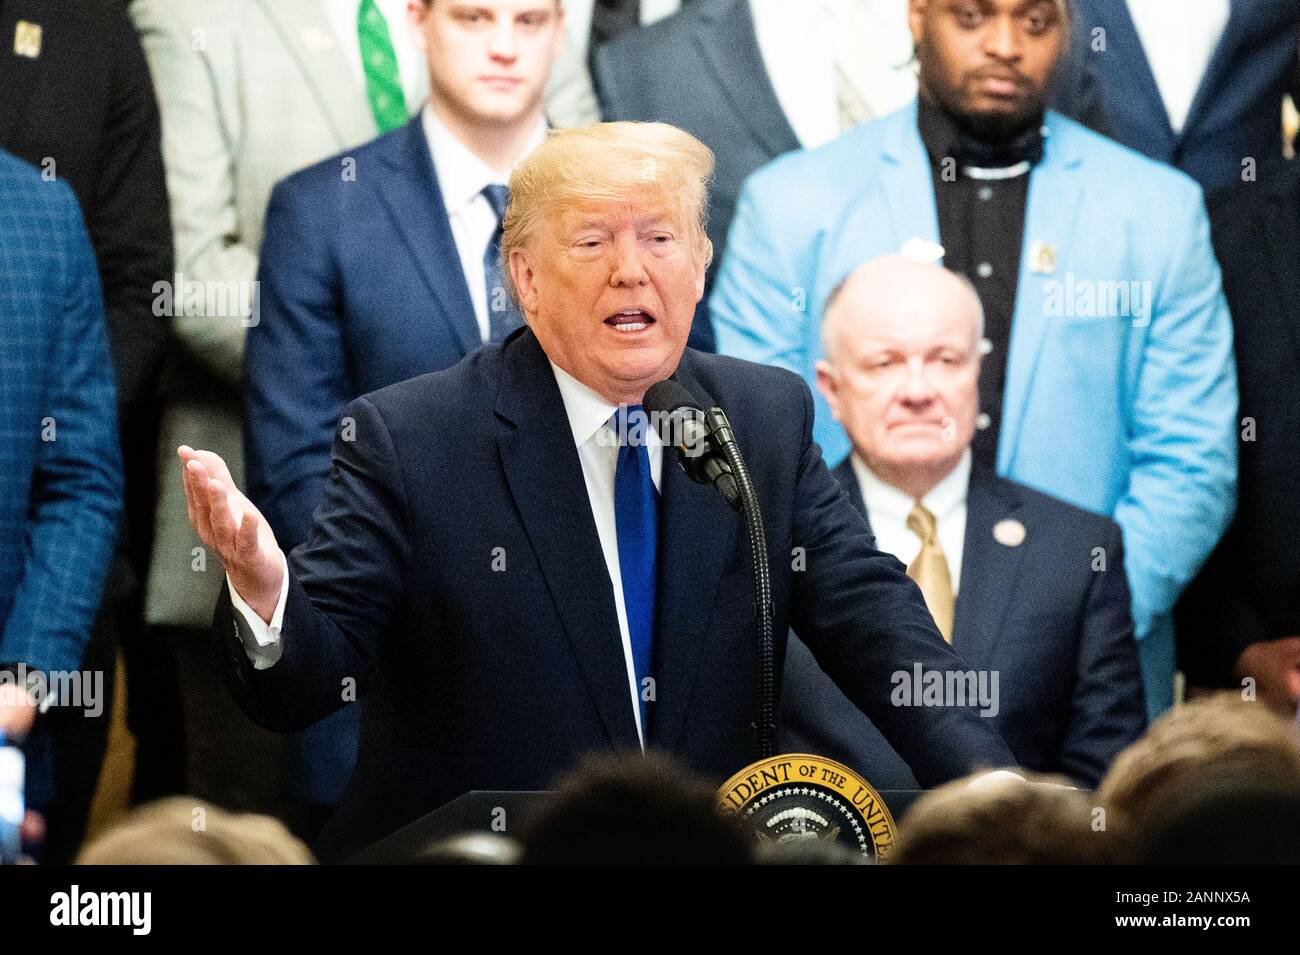 President Donald Trump speaks at the East Room during the occasion of the visit of the 2019 College Football National Champions, the Louisiana State University Tigers, to the White House. Stock Photo